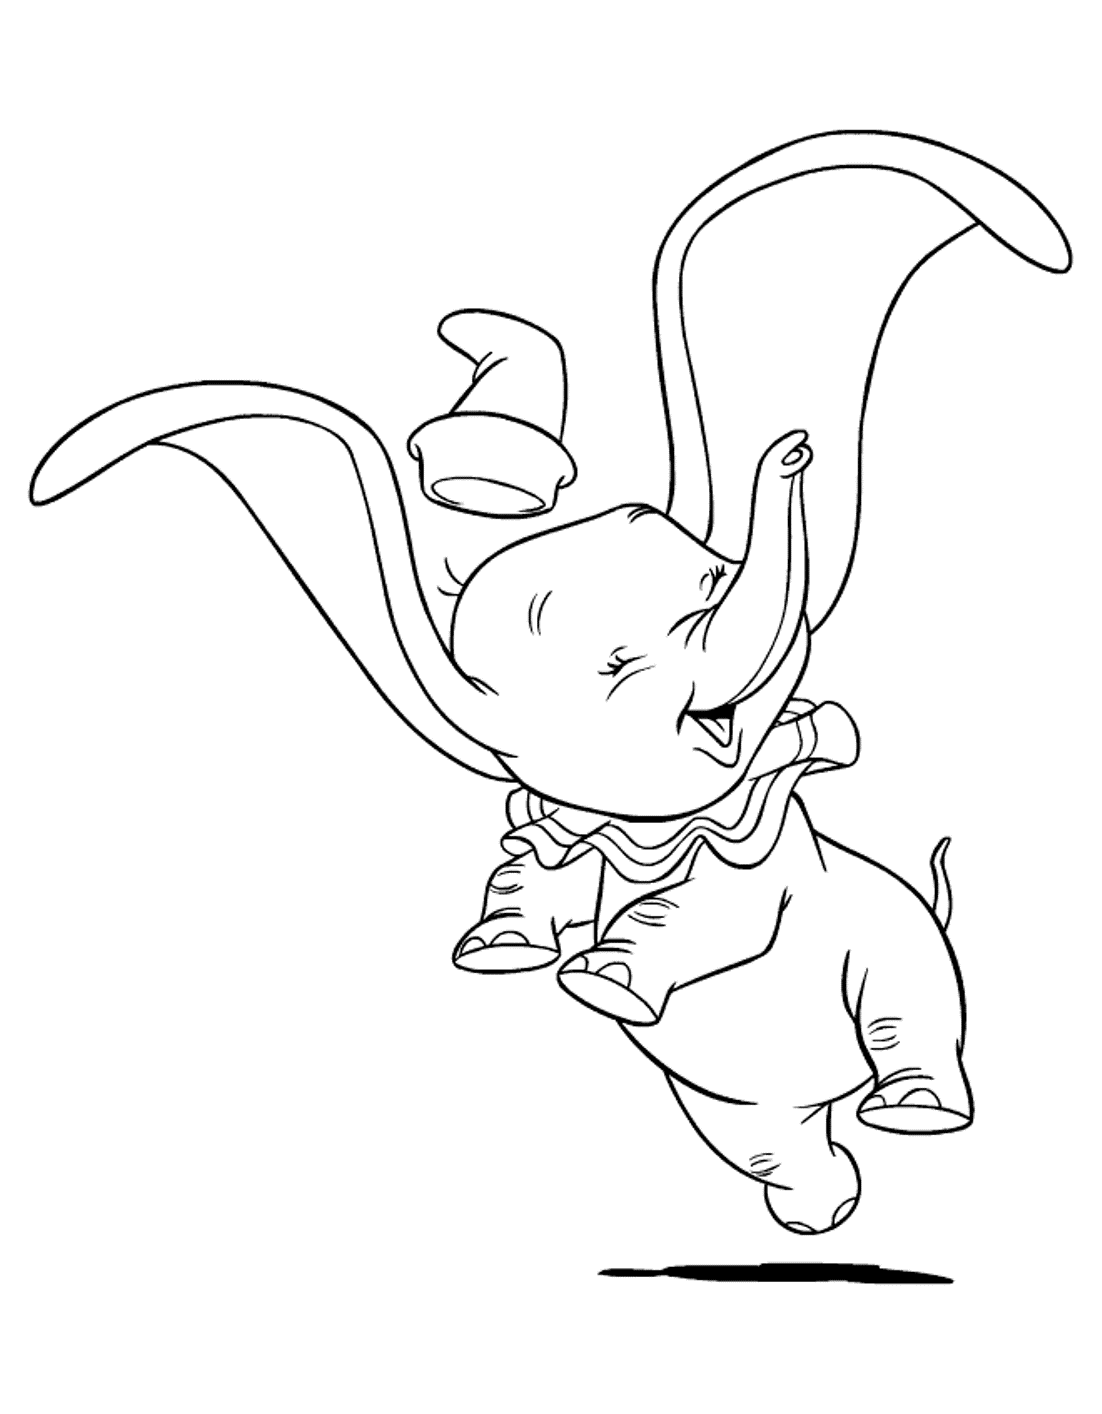 Dumbo Coloring Pages To Download And Print For Free   Coloring Home